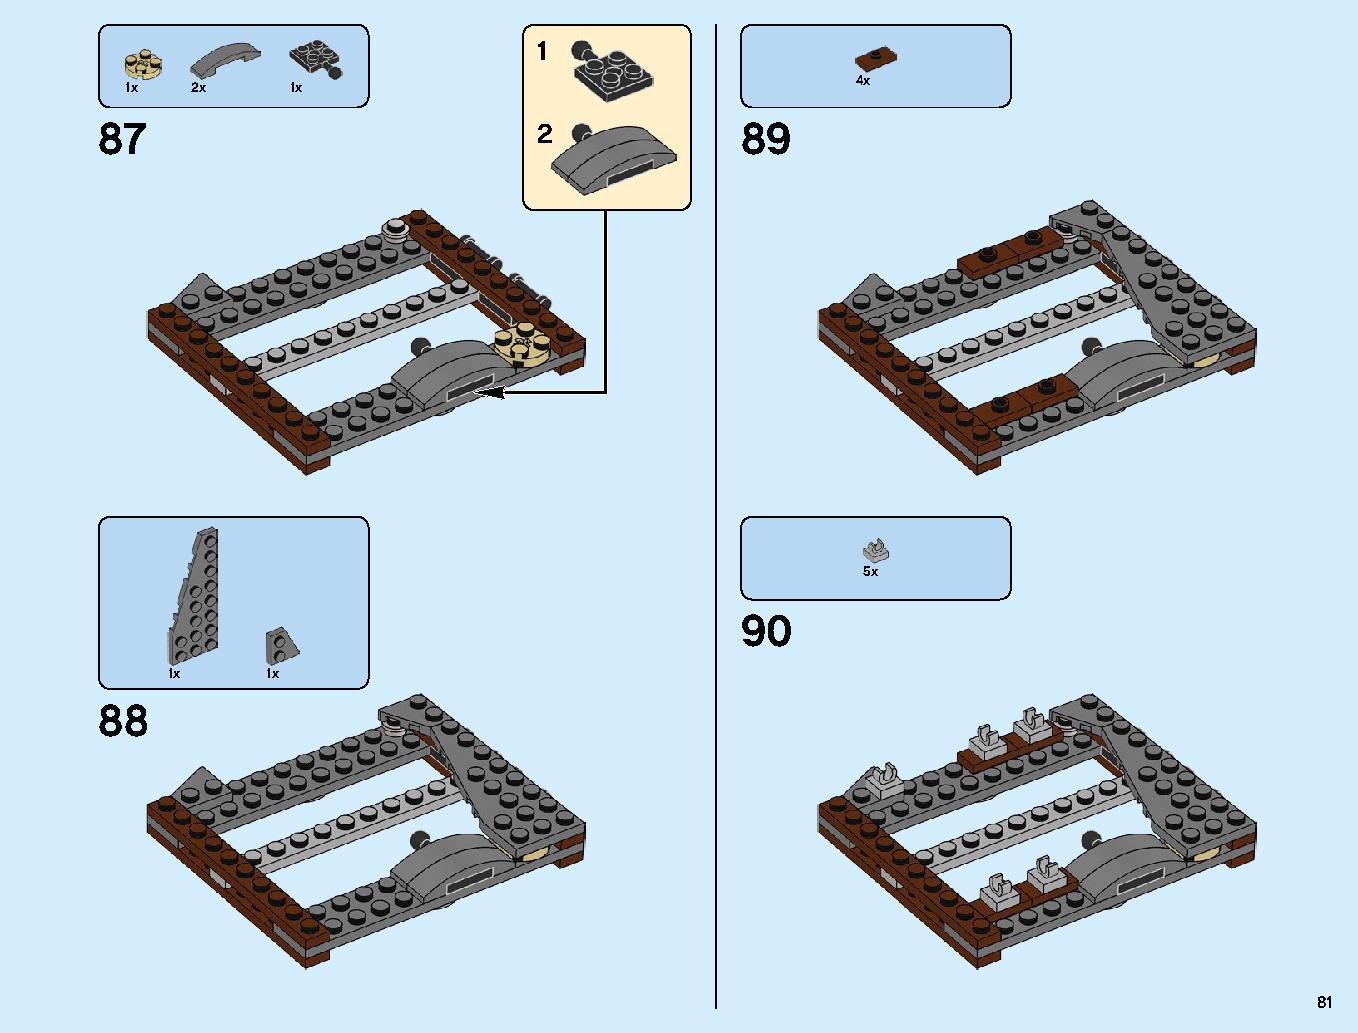 Dragon Pit 70655 LEGO information LEGO instructions 81 page